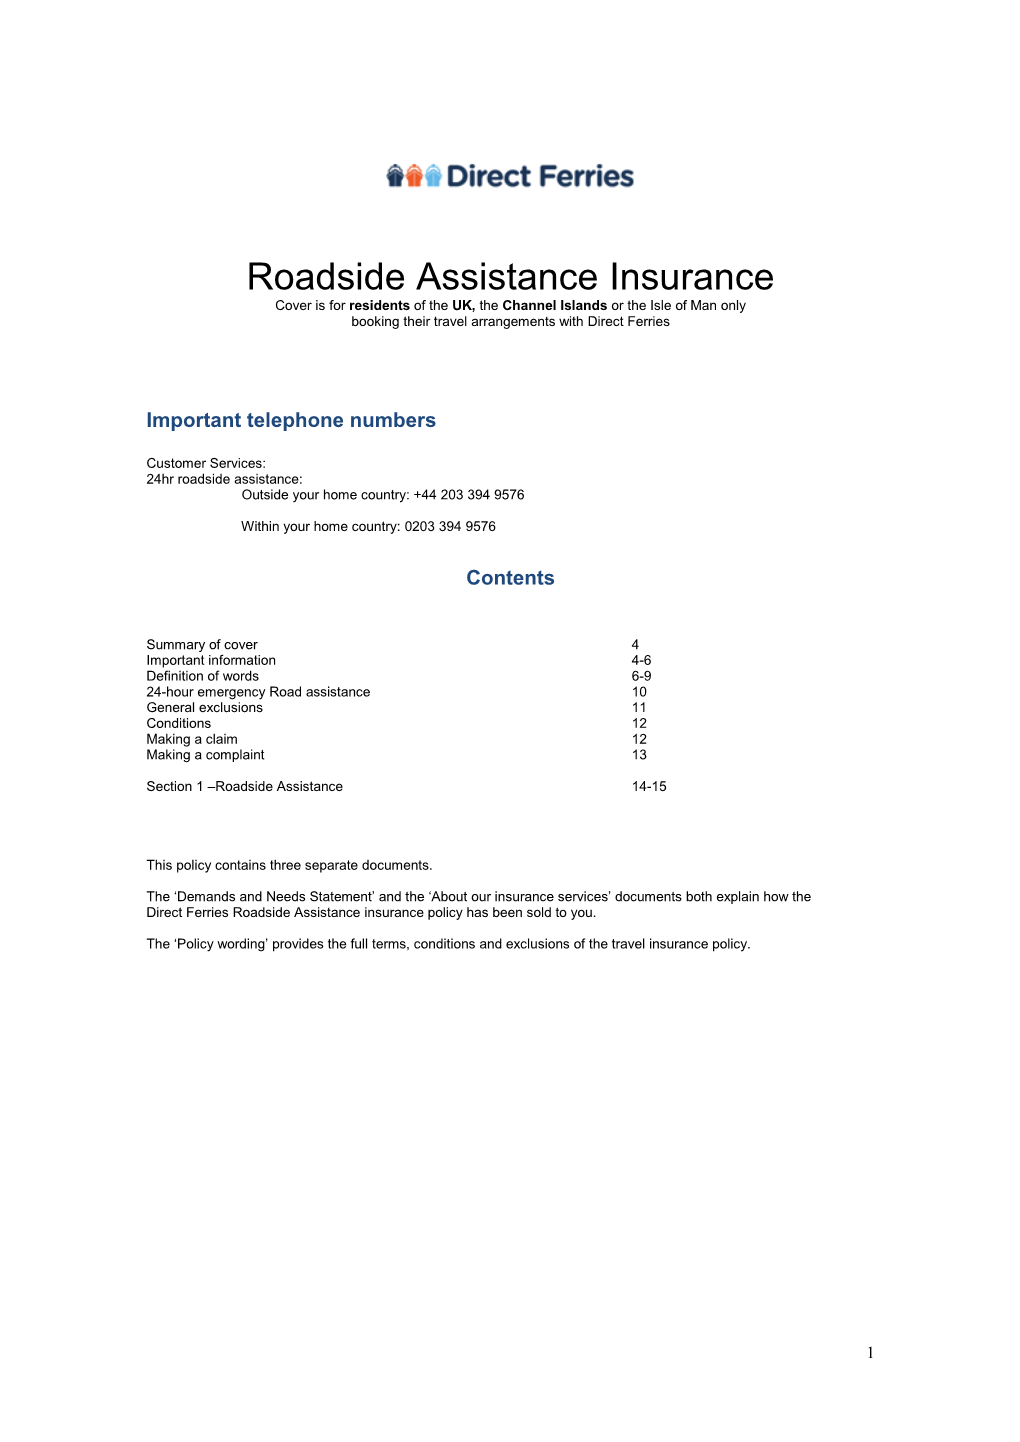 Roadside Assistance Insurance Cover Is for Residents of the UK, the Channel Islands Or the Isle of Man Only Booking Their Travel Arrangements with Direct Ferries